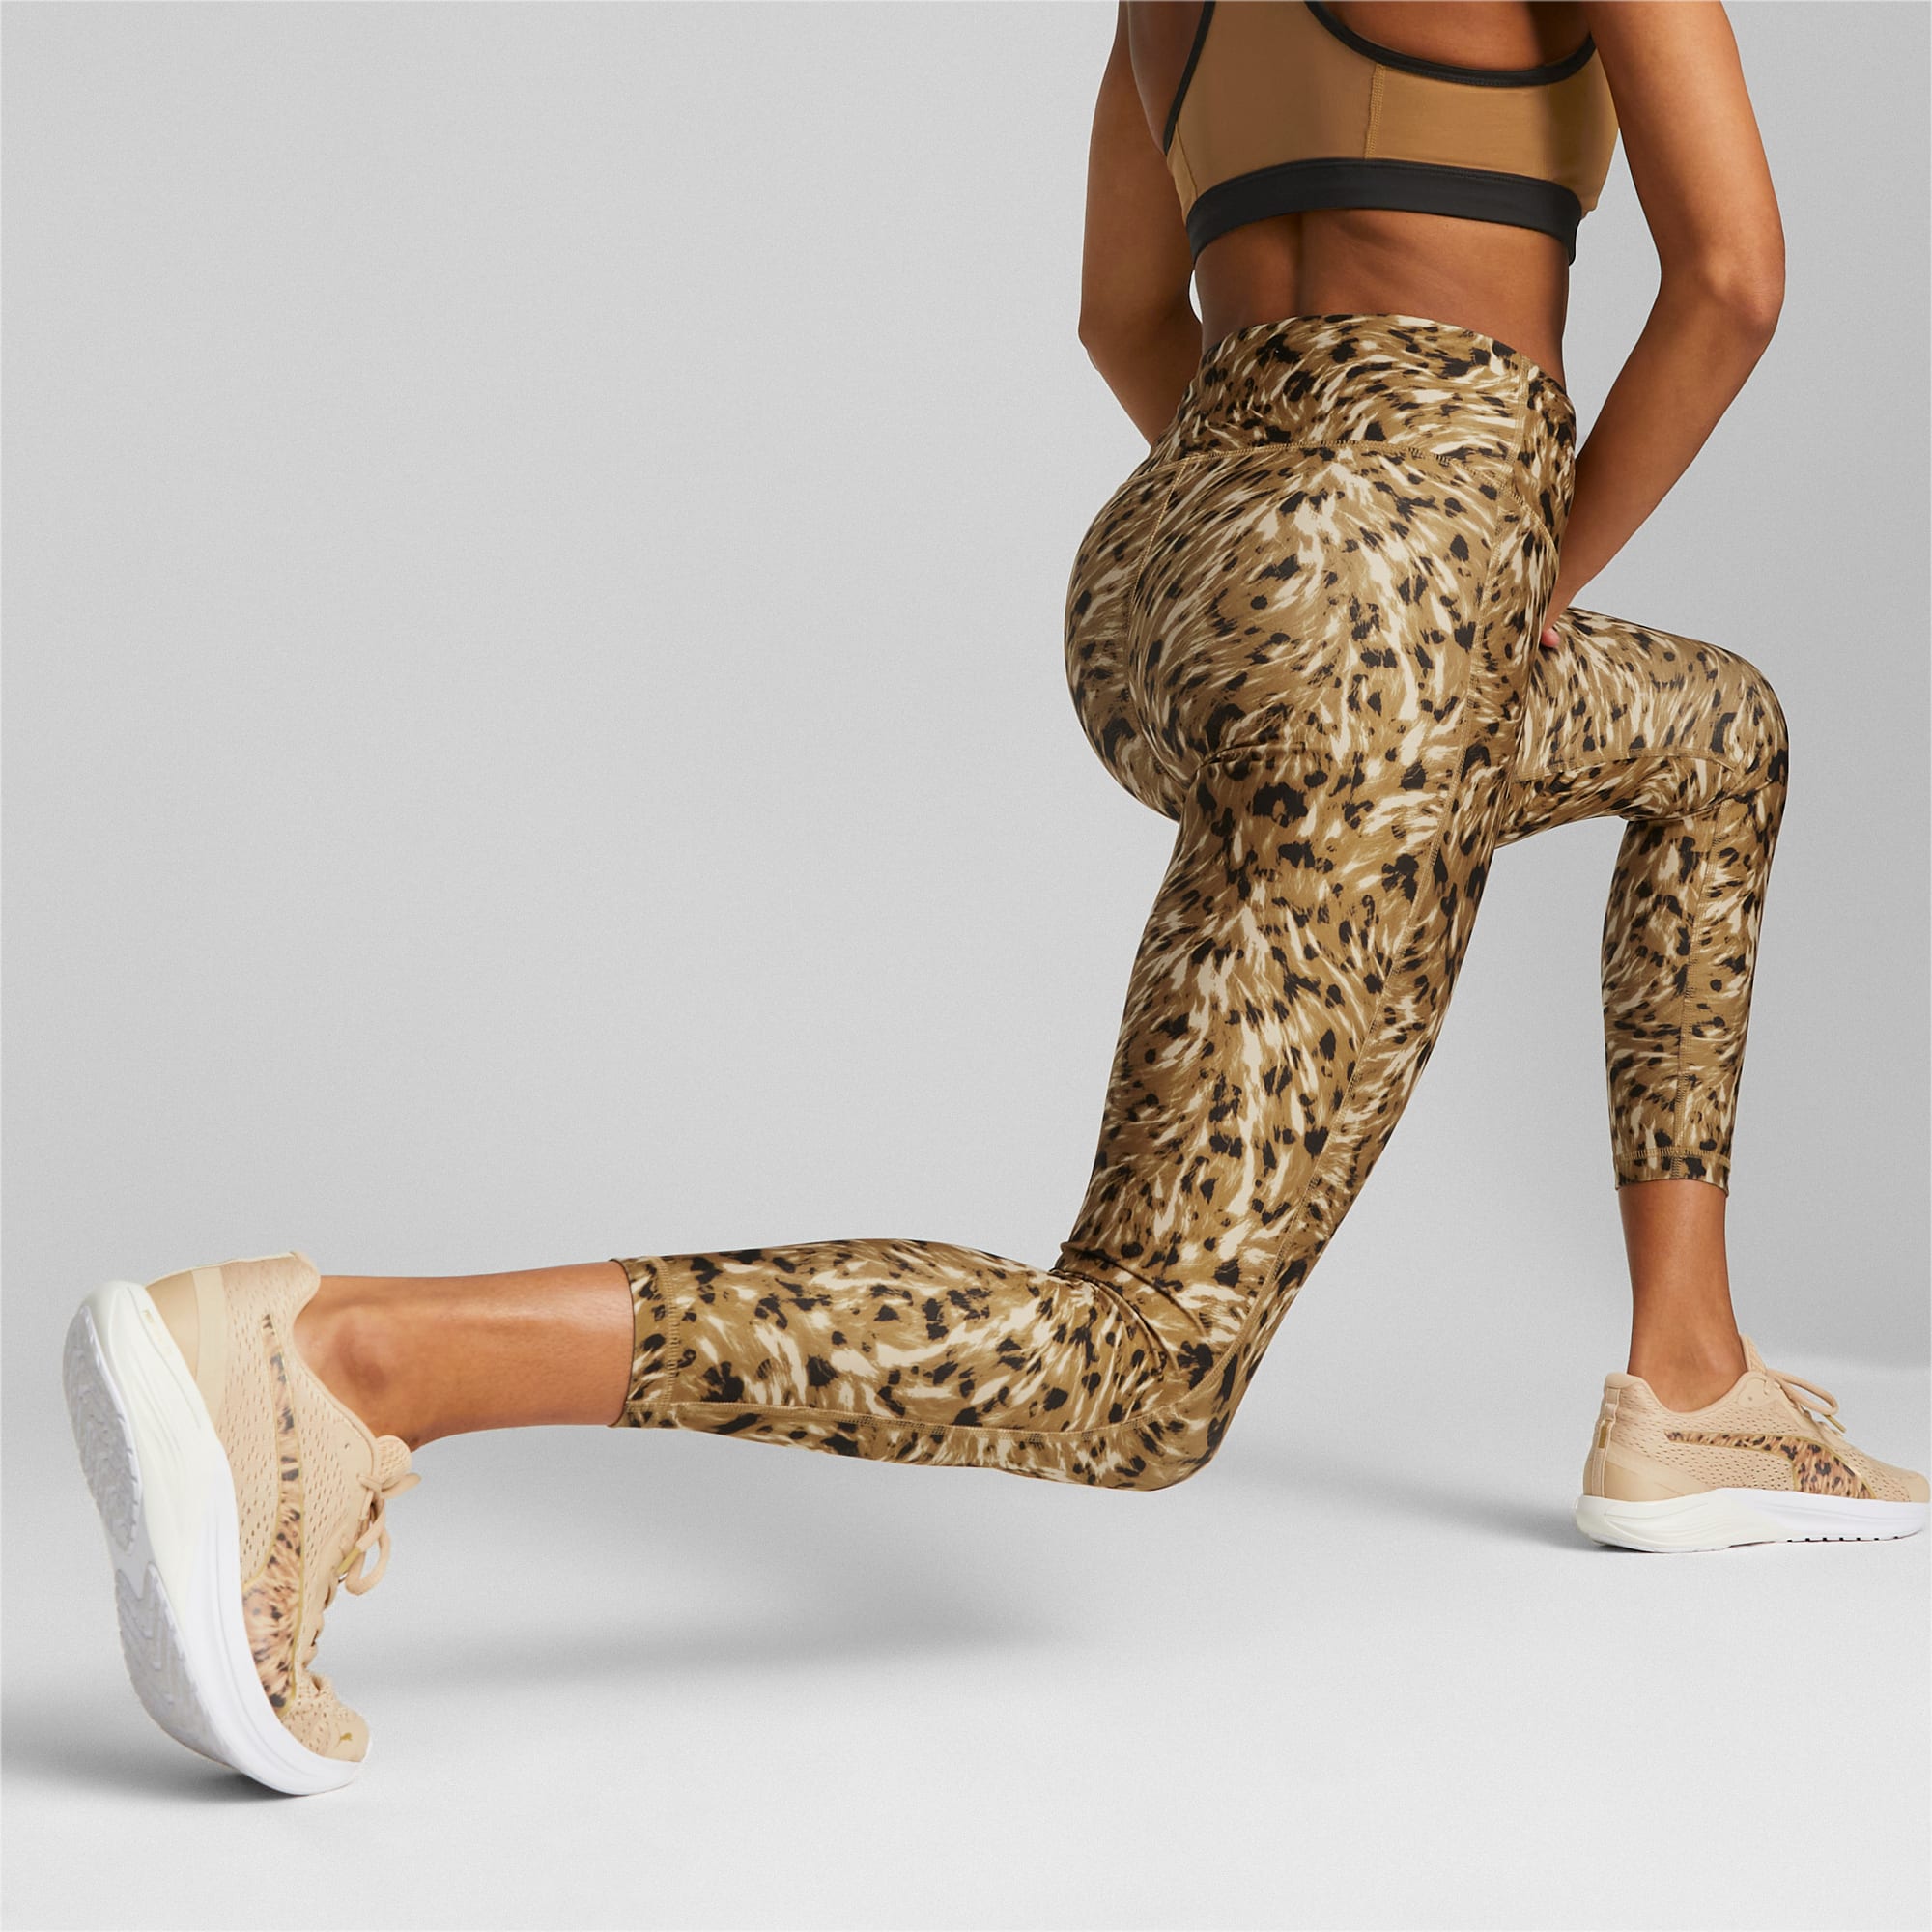 7 ANIMAL PRINTS leopard high waisted yoga pants workout leggings gym tights  women sports running fitnes…